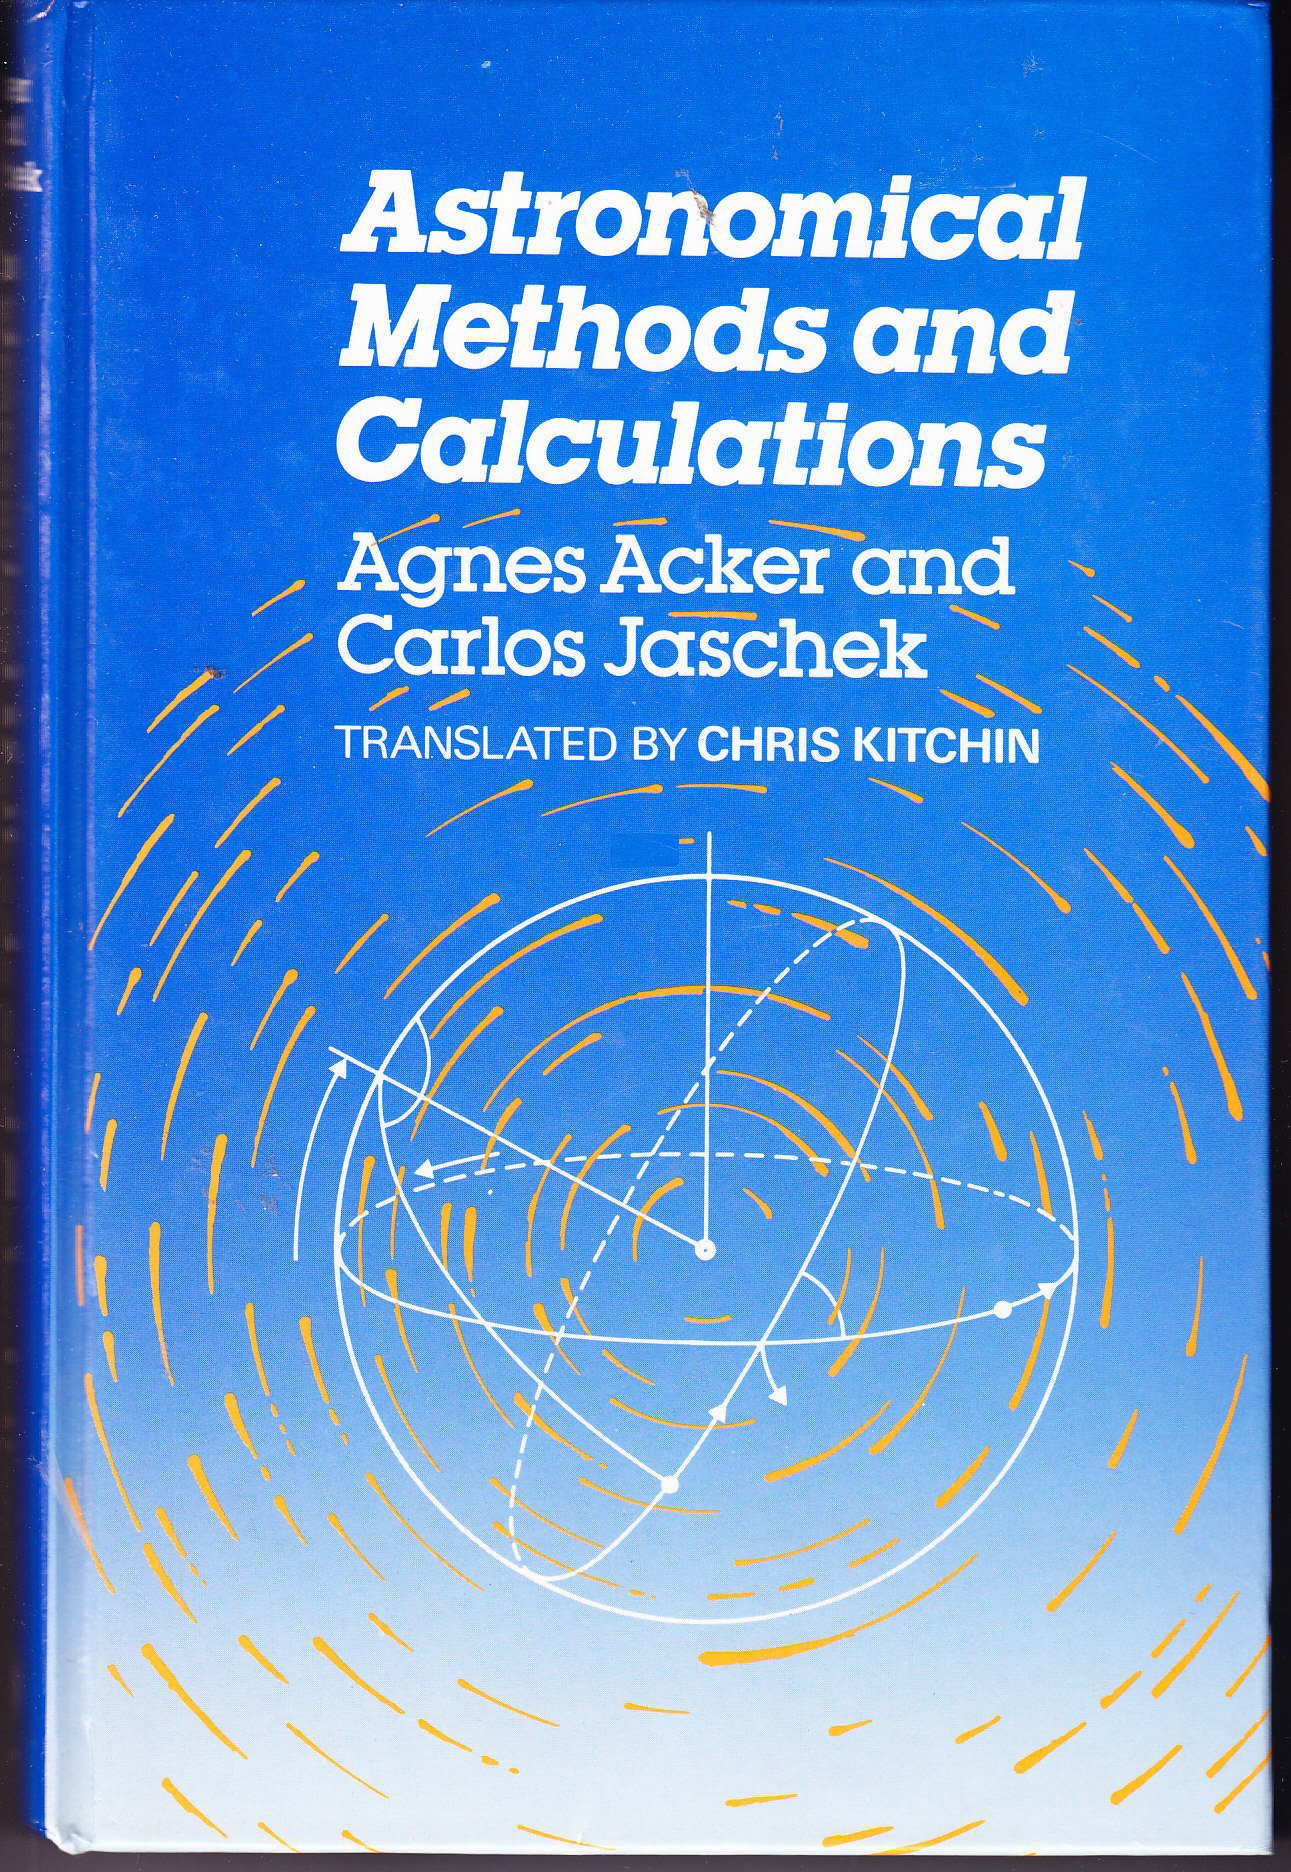 Cover of Astronomical Methods and Calculations